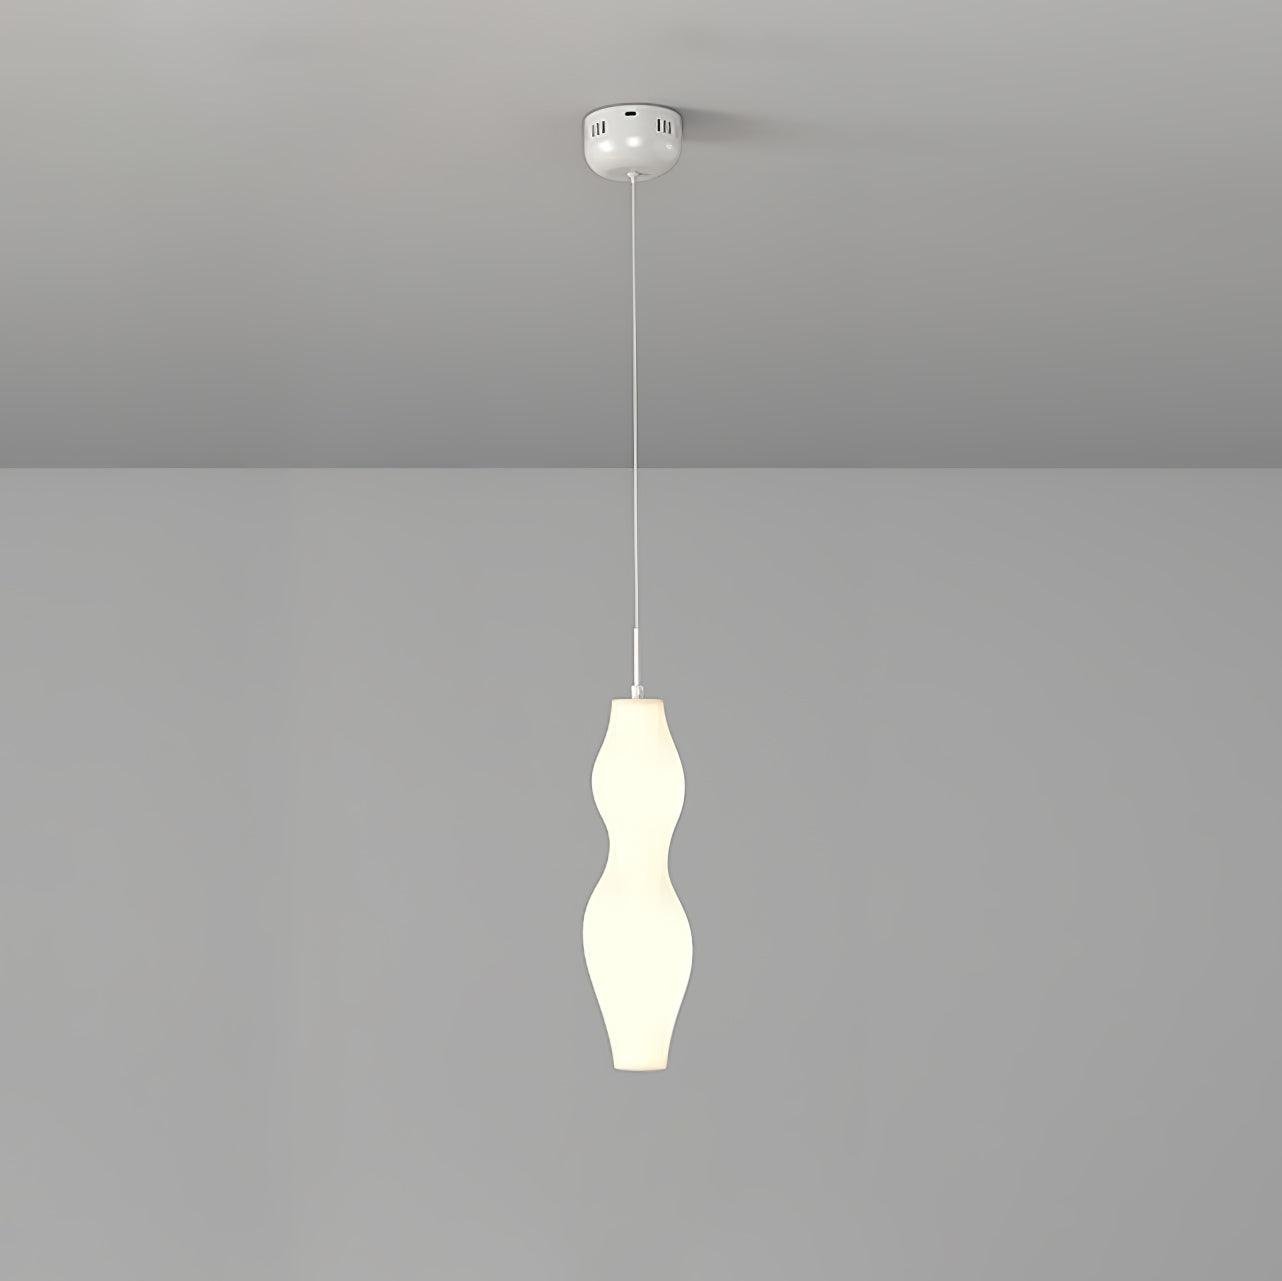 Empirico Pendant Lamp in White with Cool Light, Diameter 6.3 inches x Height 19.7 inches (16cm x 50cm)